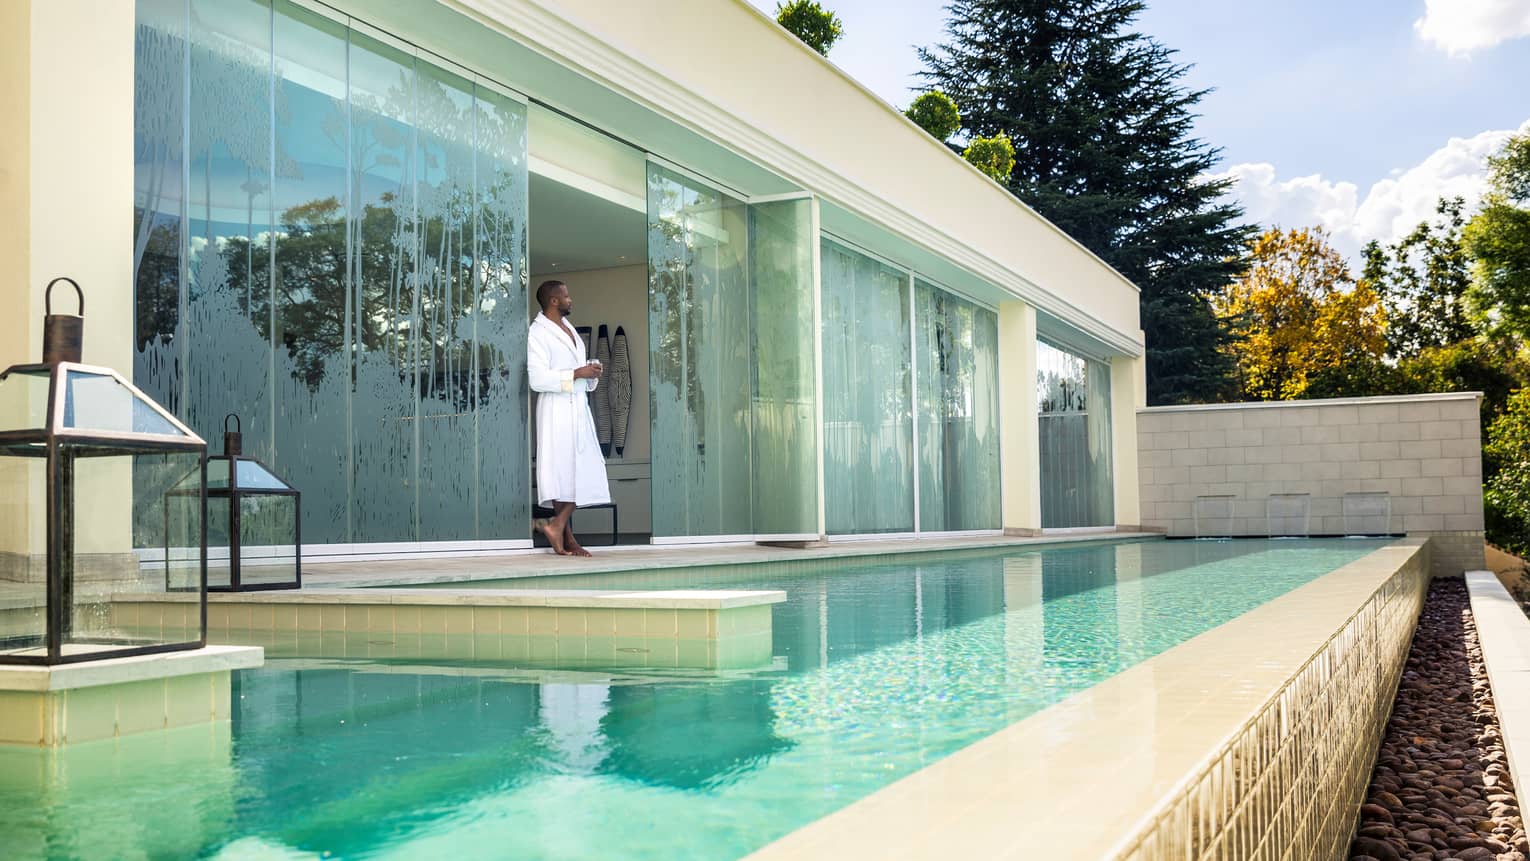 Man in white bathrobe stands between Spa glass windows on swimming pool deck